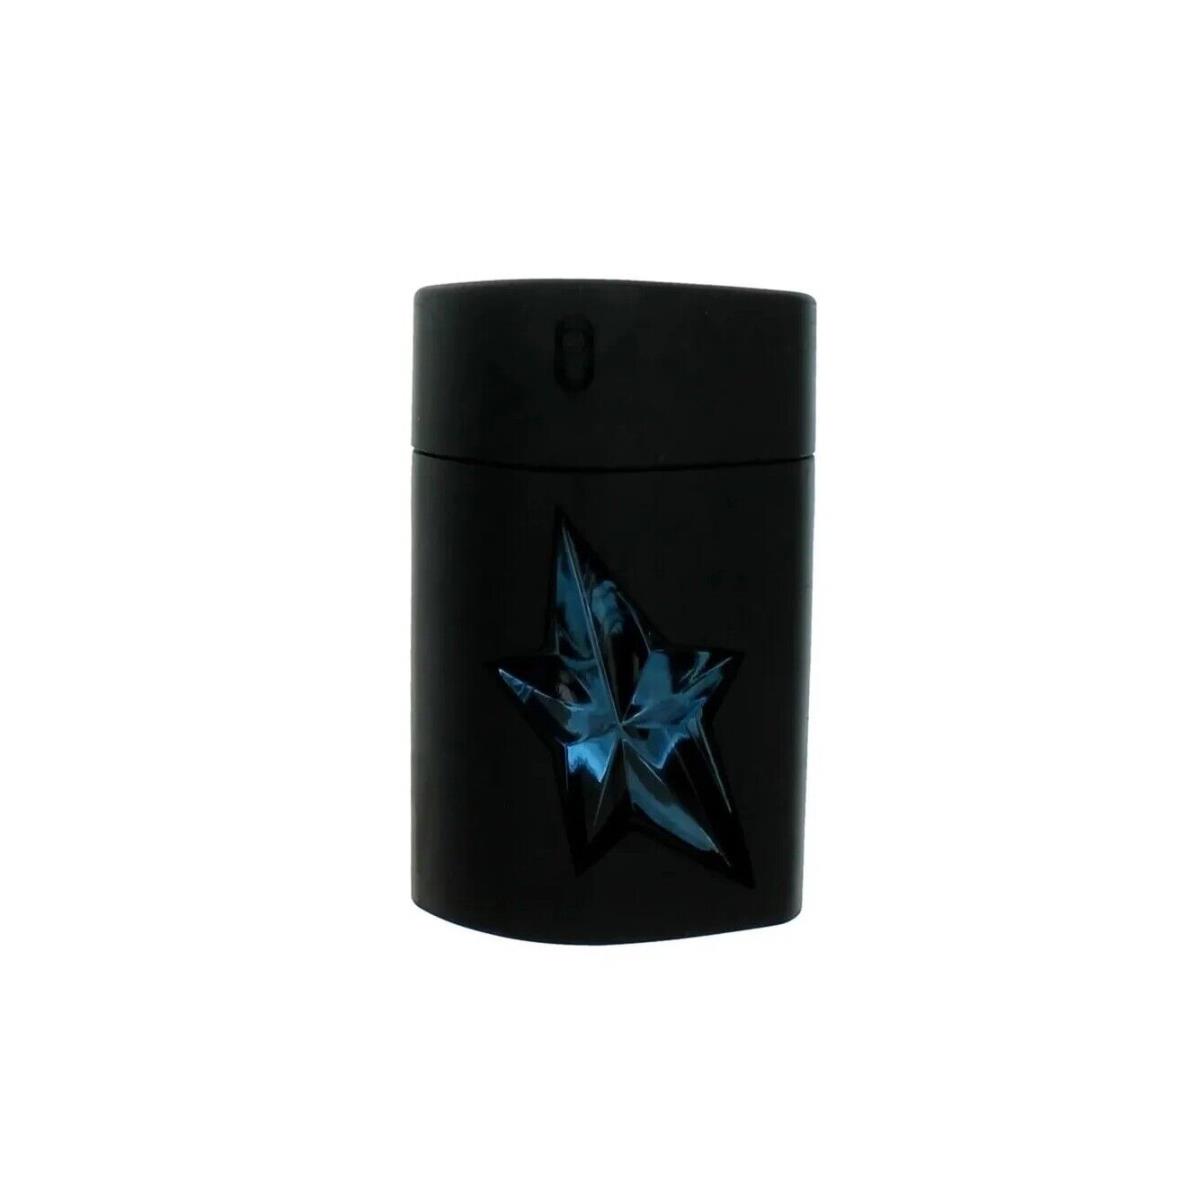 Angel By Thierry Mugler Edt Refillable Rubber Spray 1.6 Oz For Men